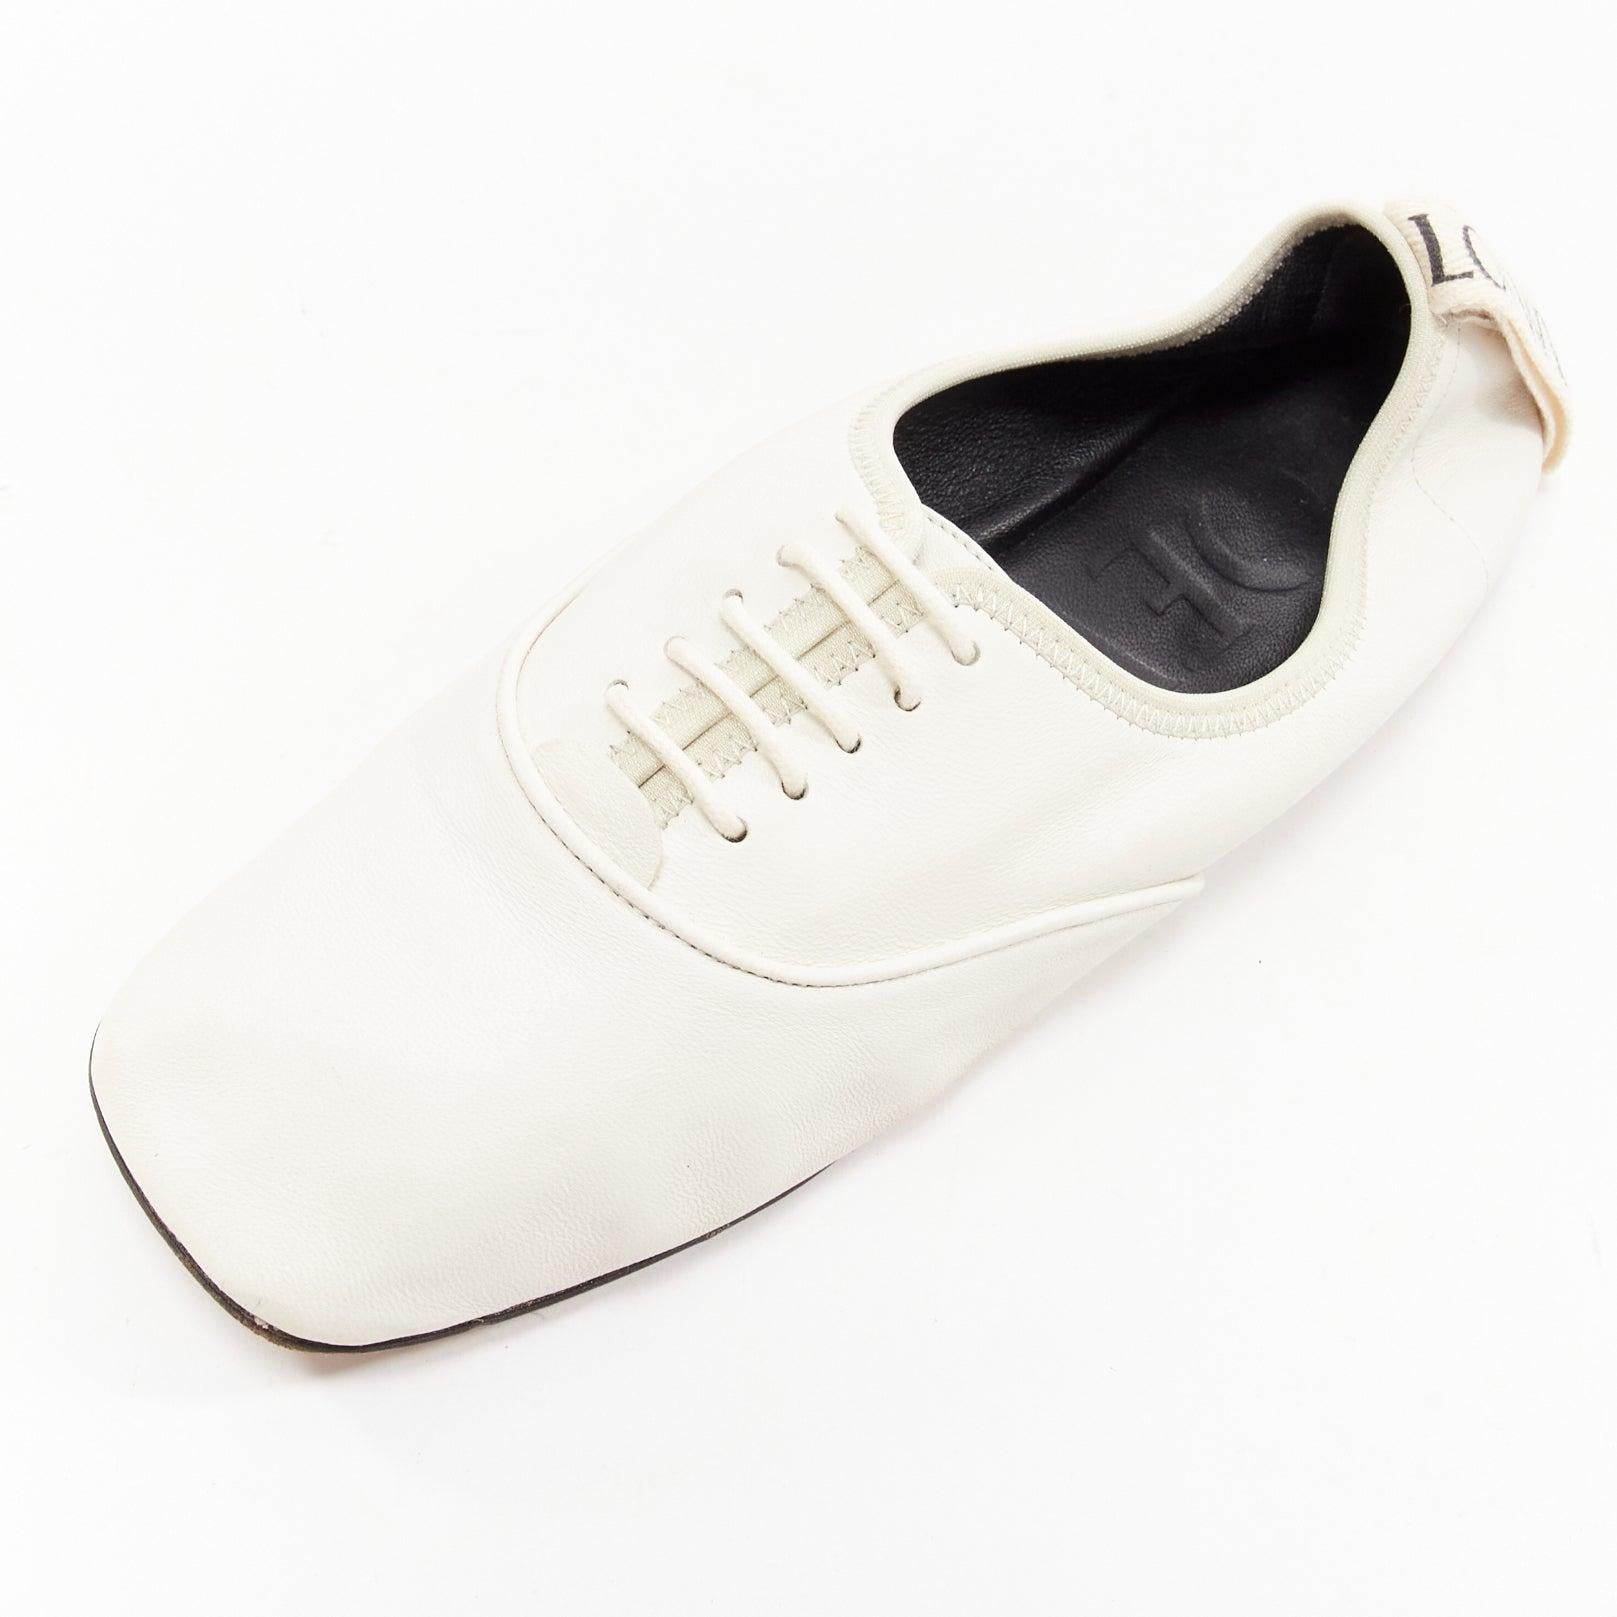 LOEWE Derby white soft leather black logo tab lace up flat shoes EU37 For Sale 3